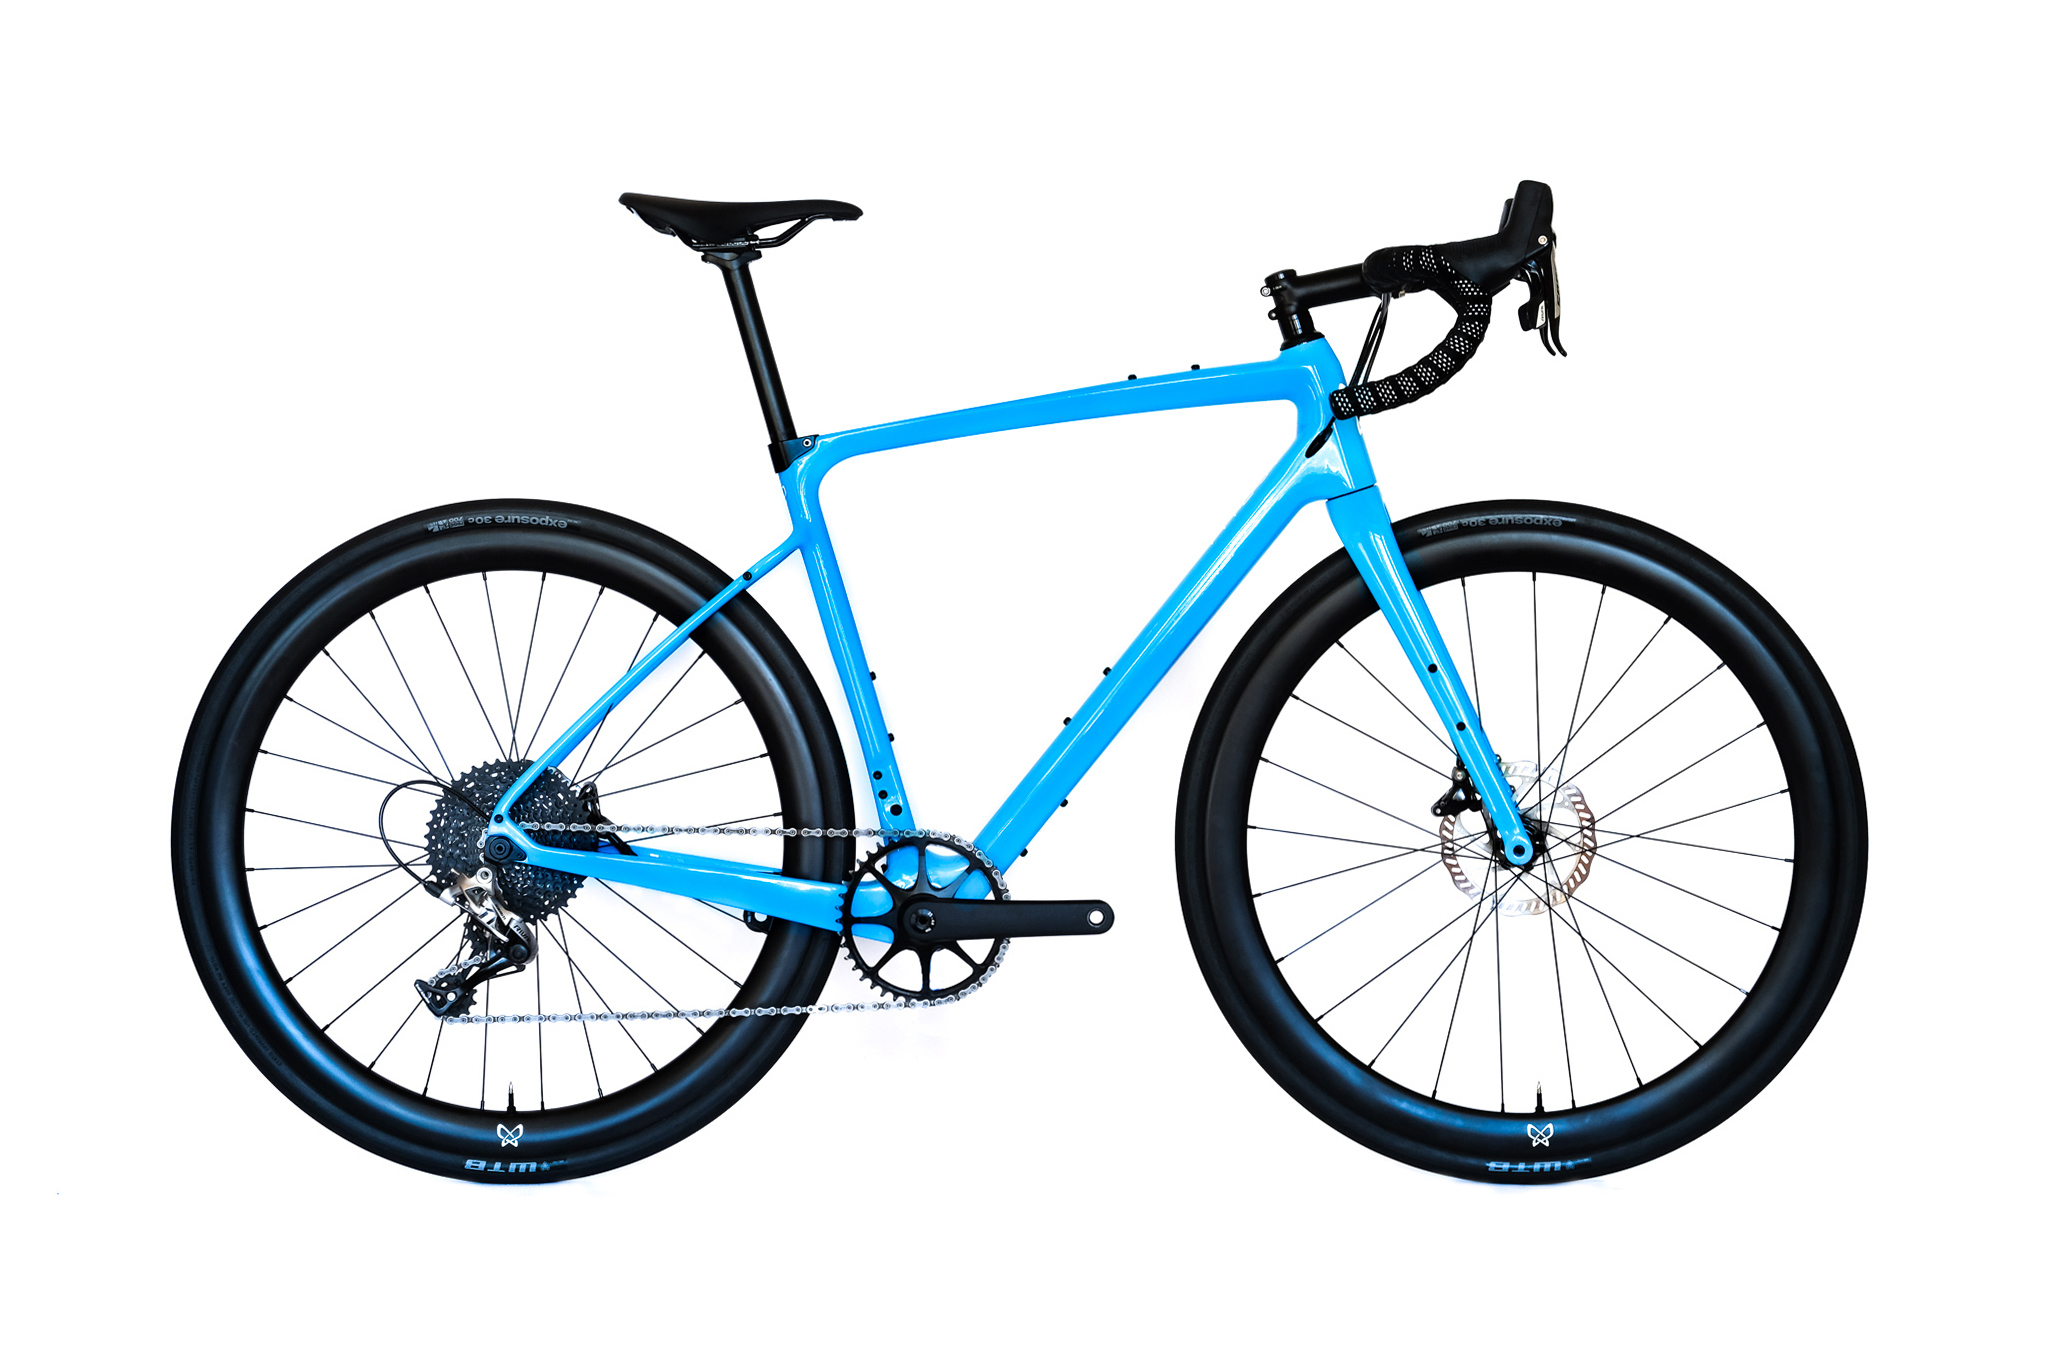 Pre-order your Thesis OB1 gravel bike now to ride in the New Year